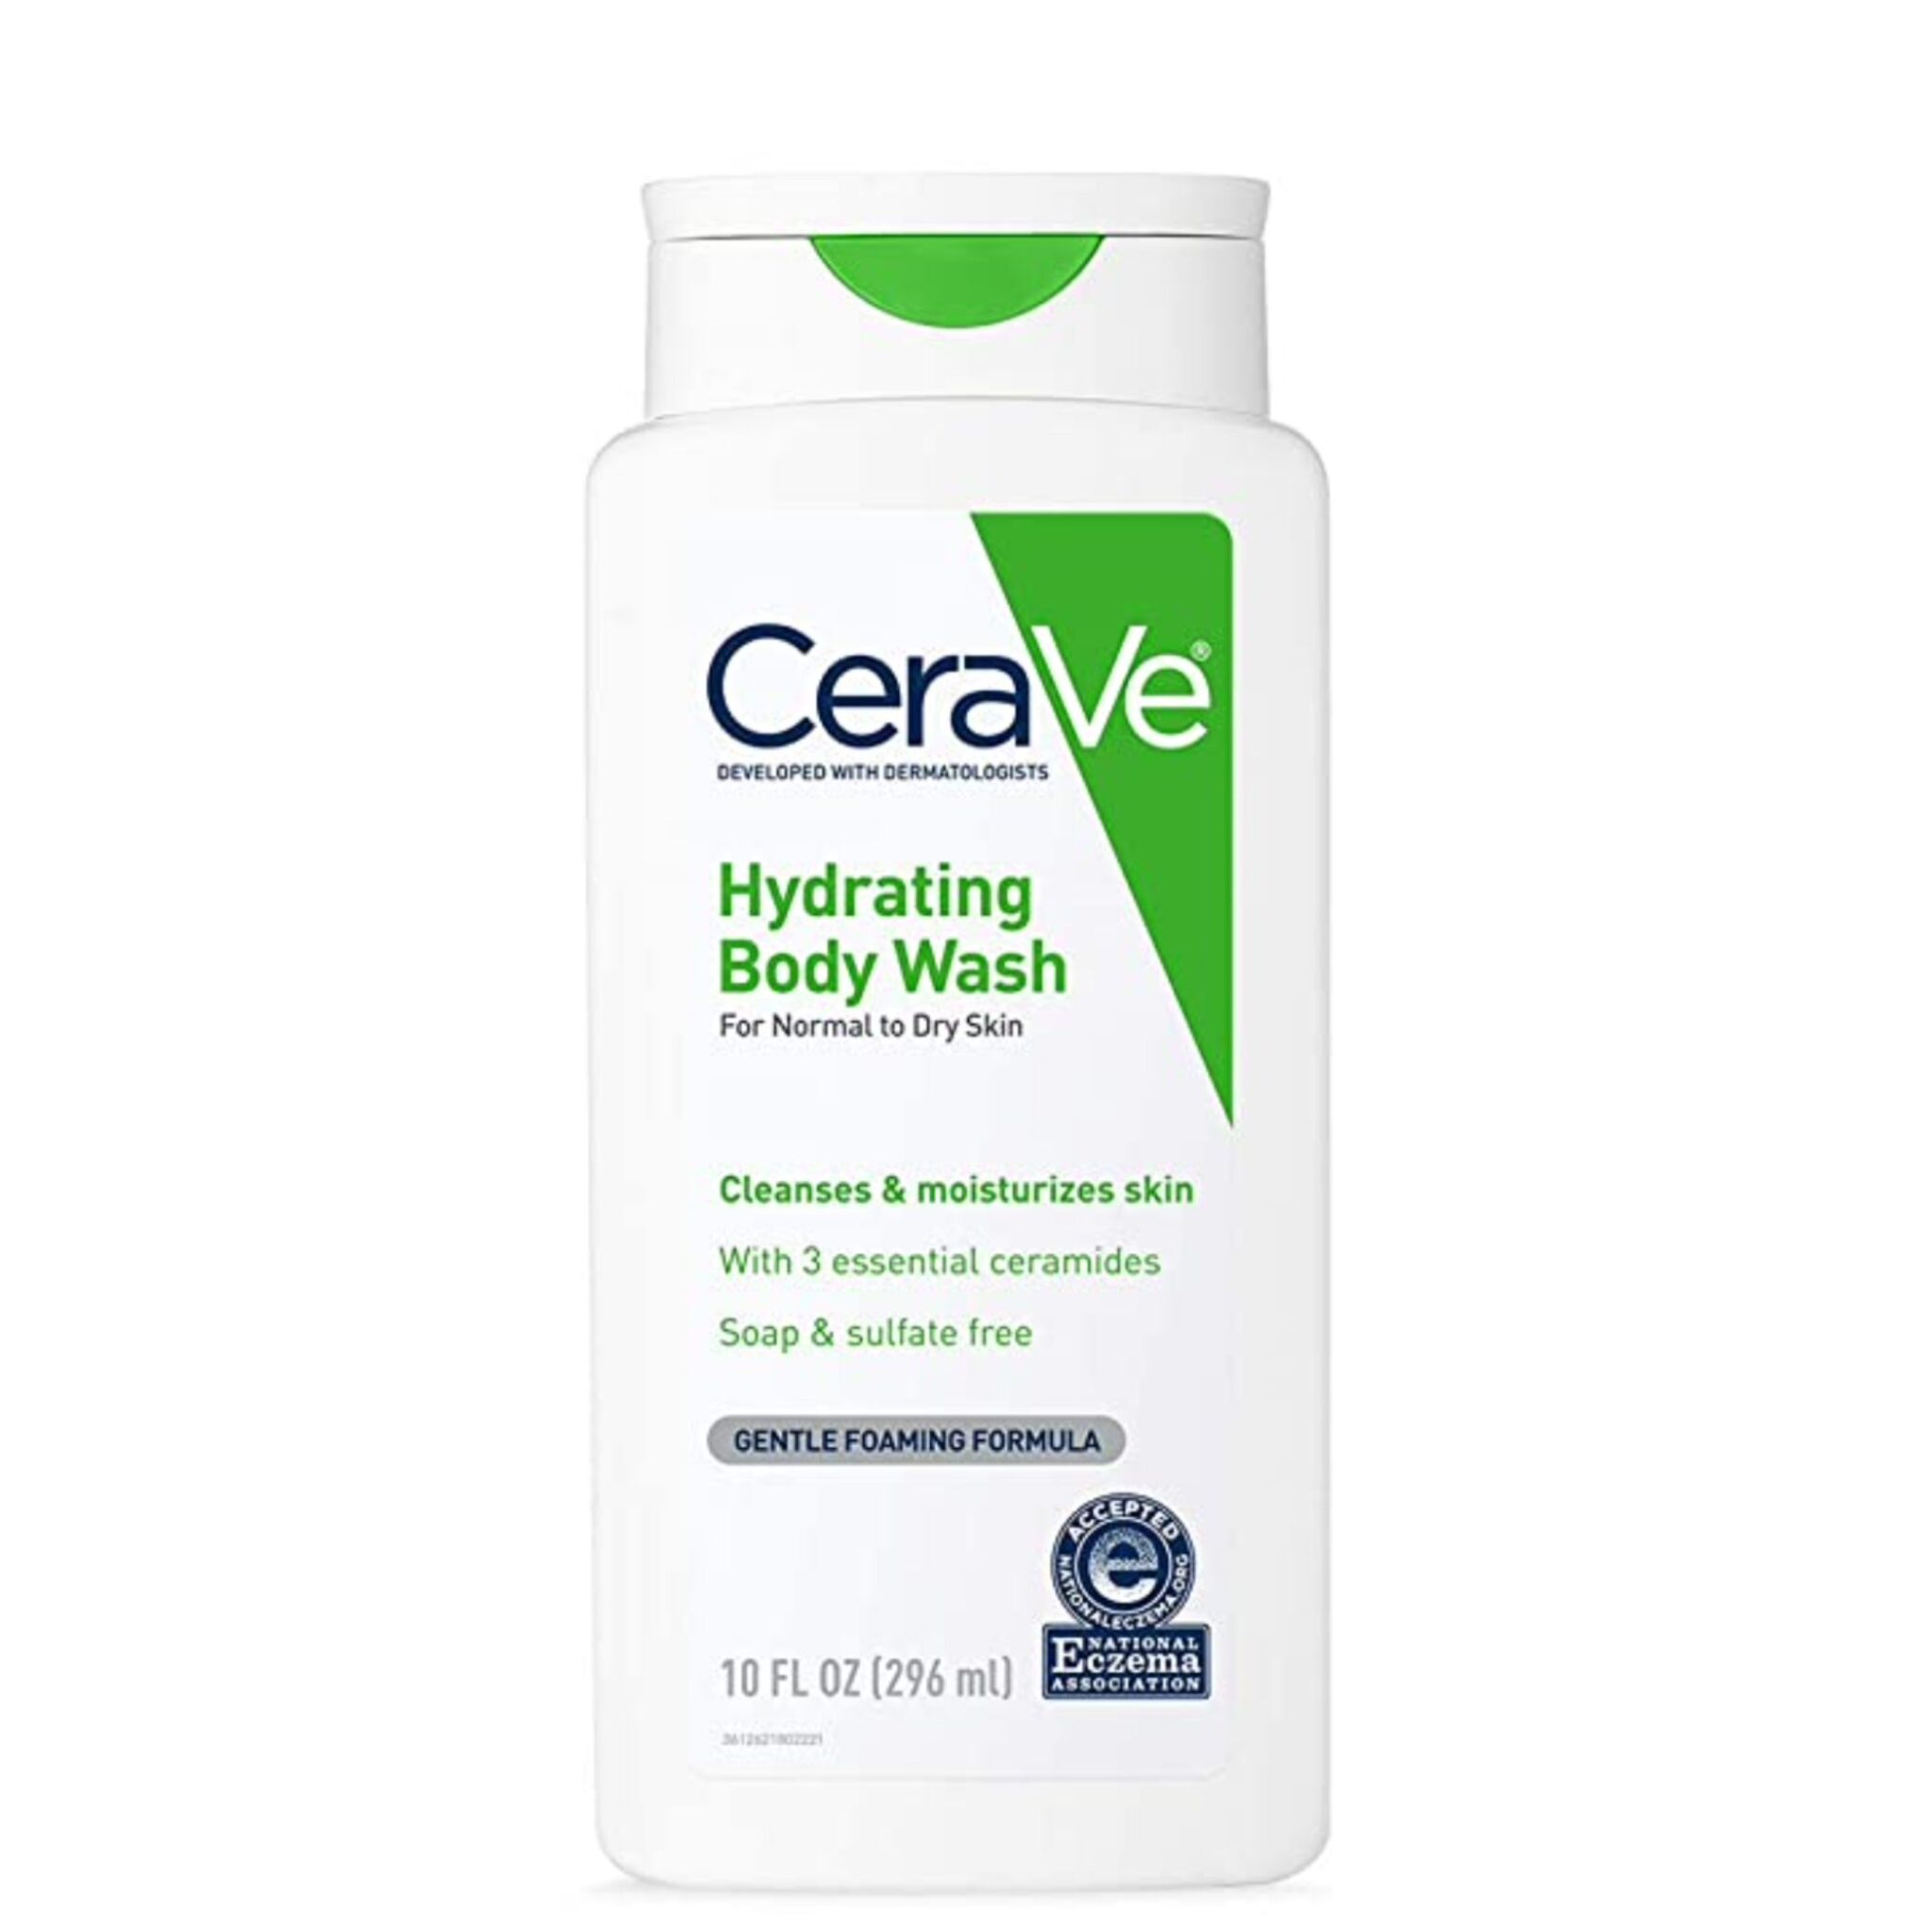 CeraVe body wash is the best moisturizer to use after a spray tan